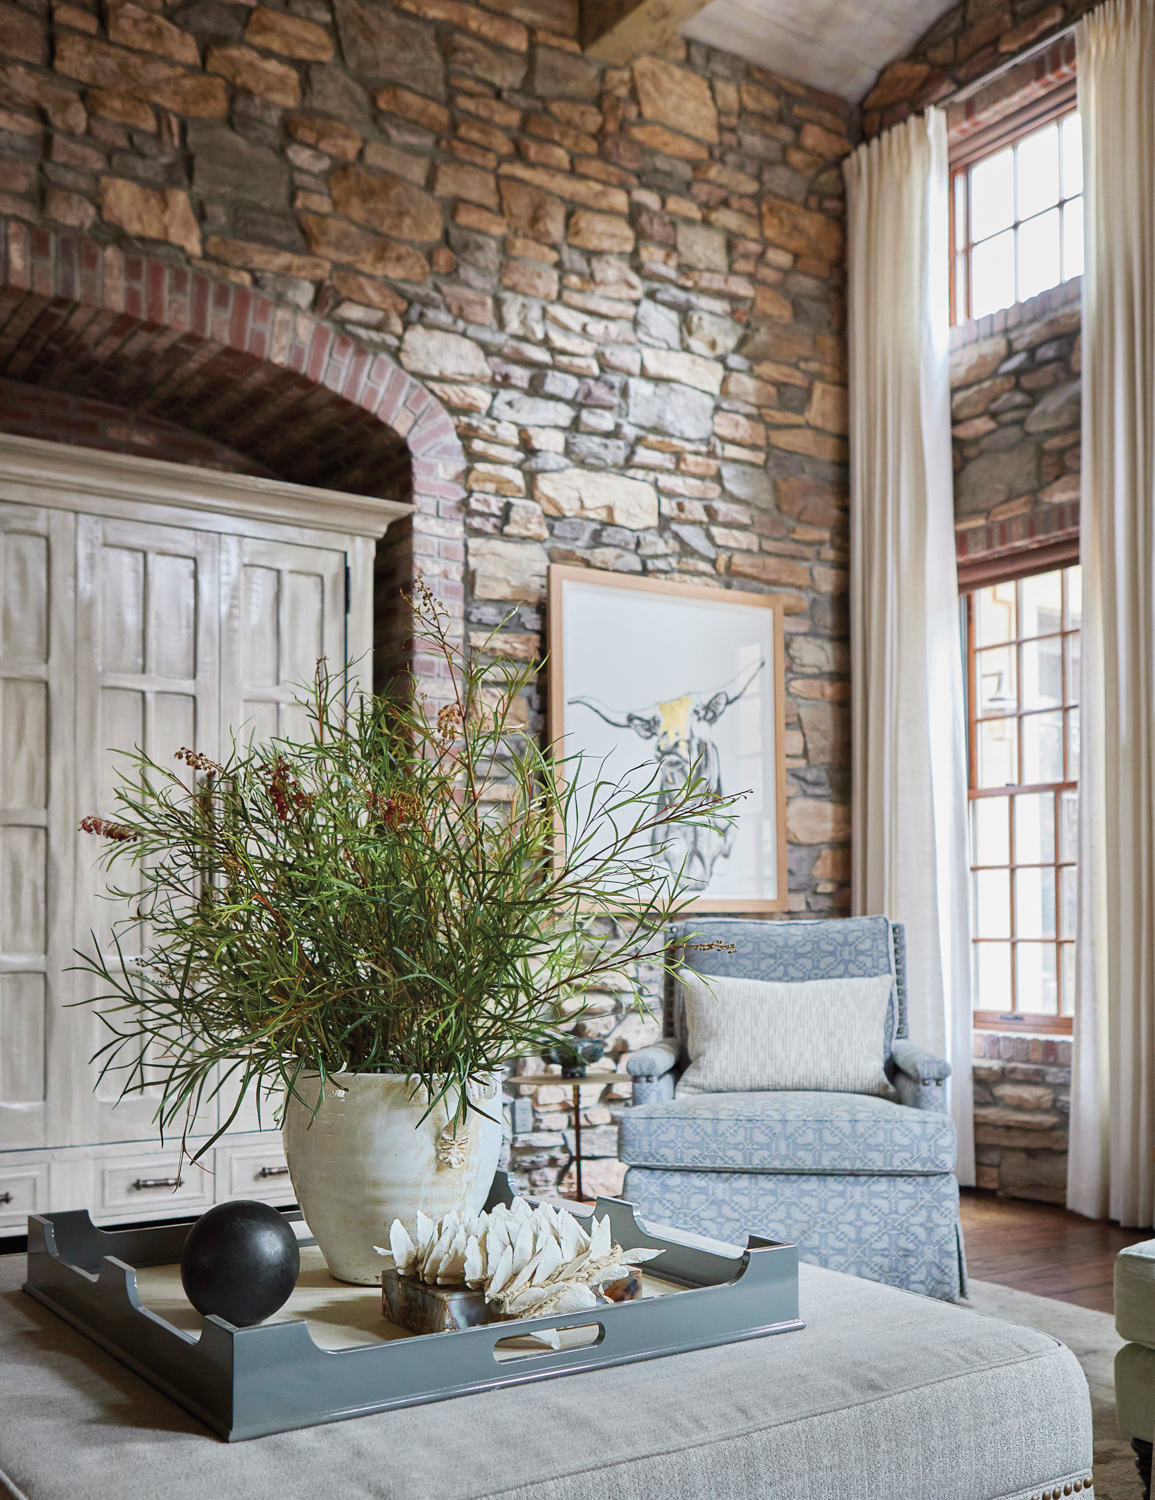 A blue armchair, gray uplhostered coffee table with a plant atop, and a tall gray wood dresser in a room with natural-stone walls.